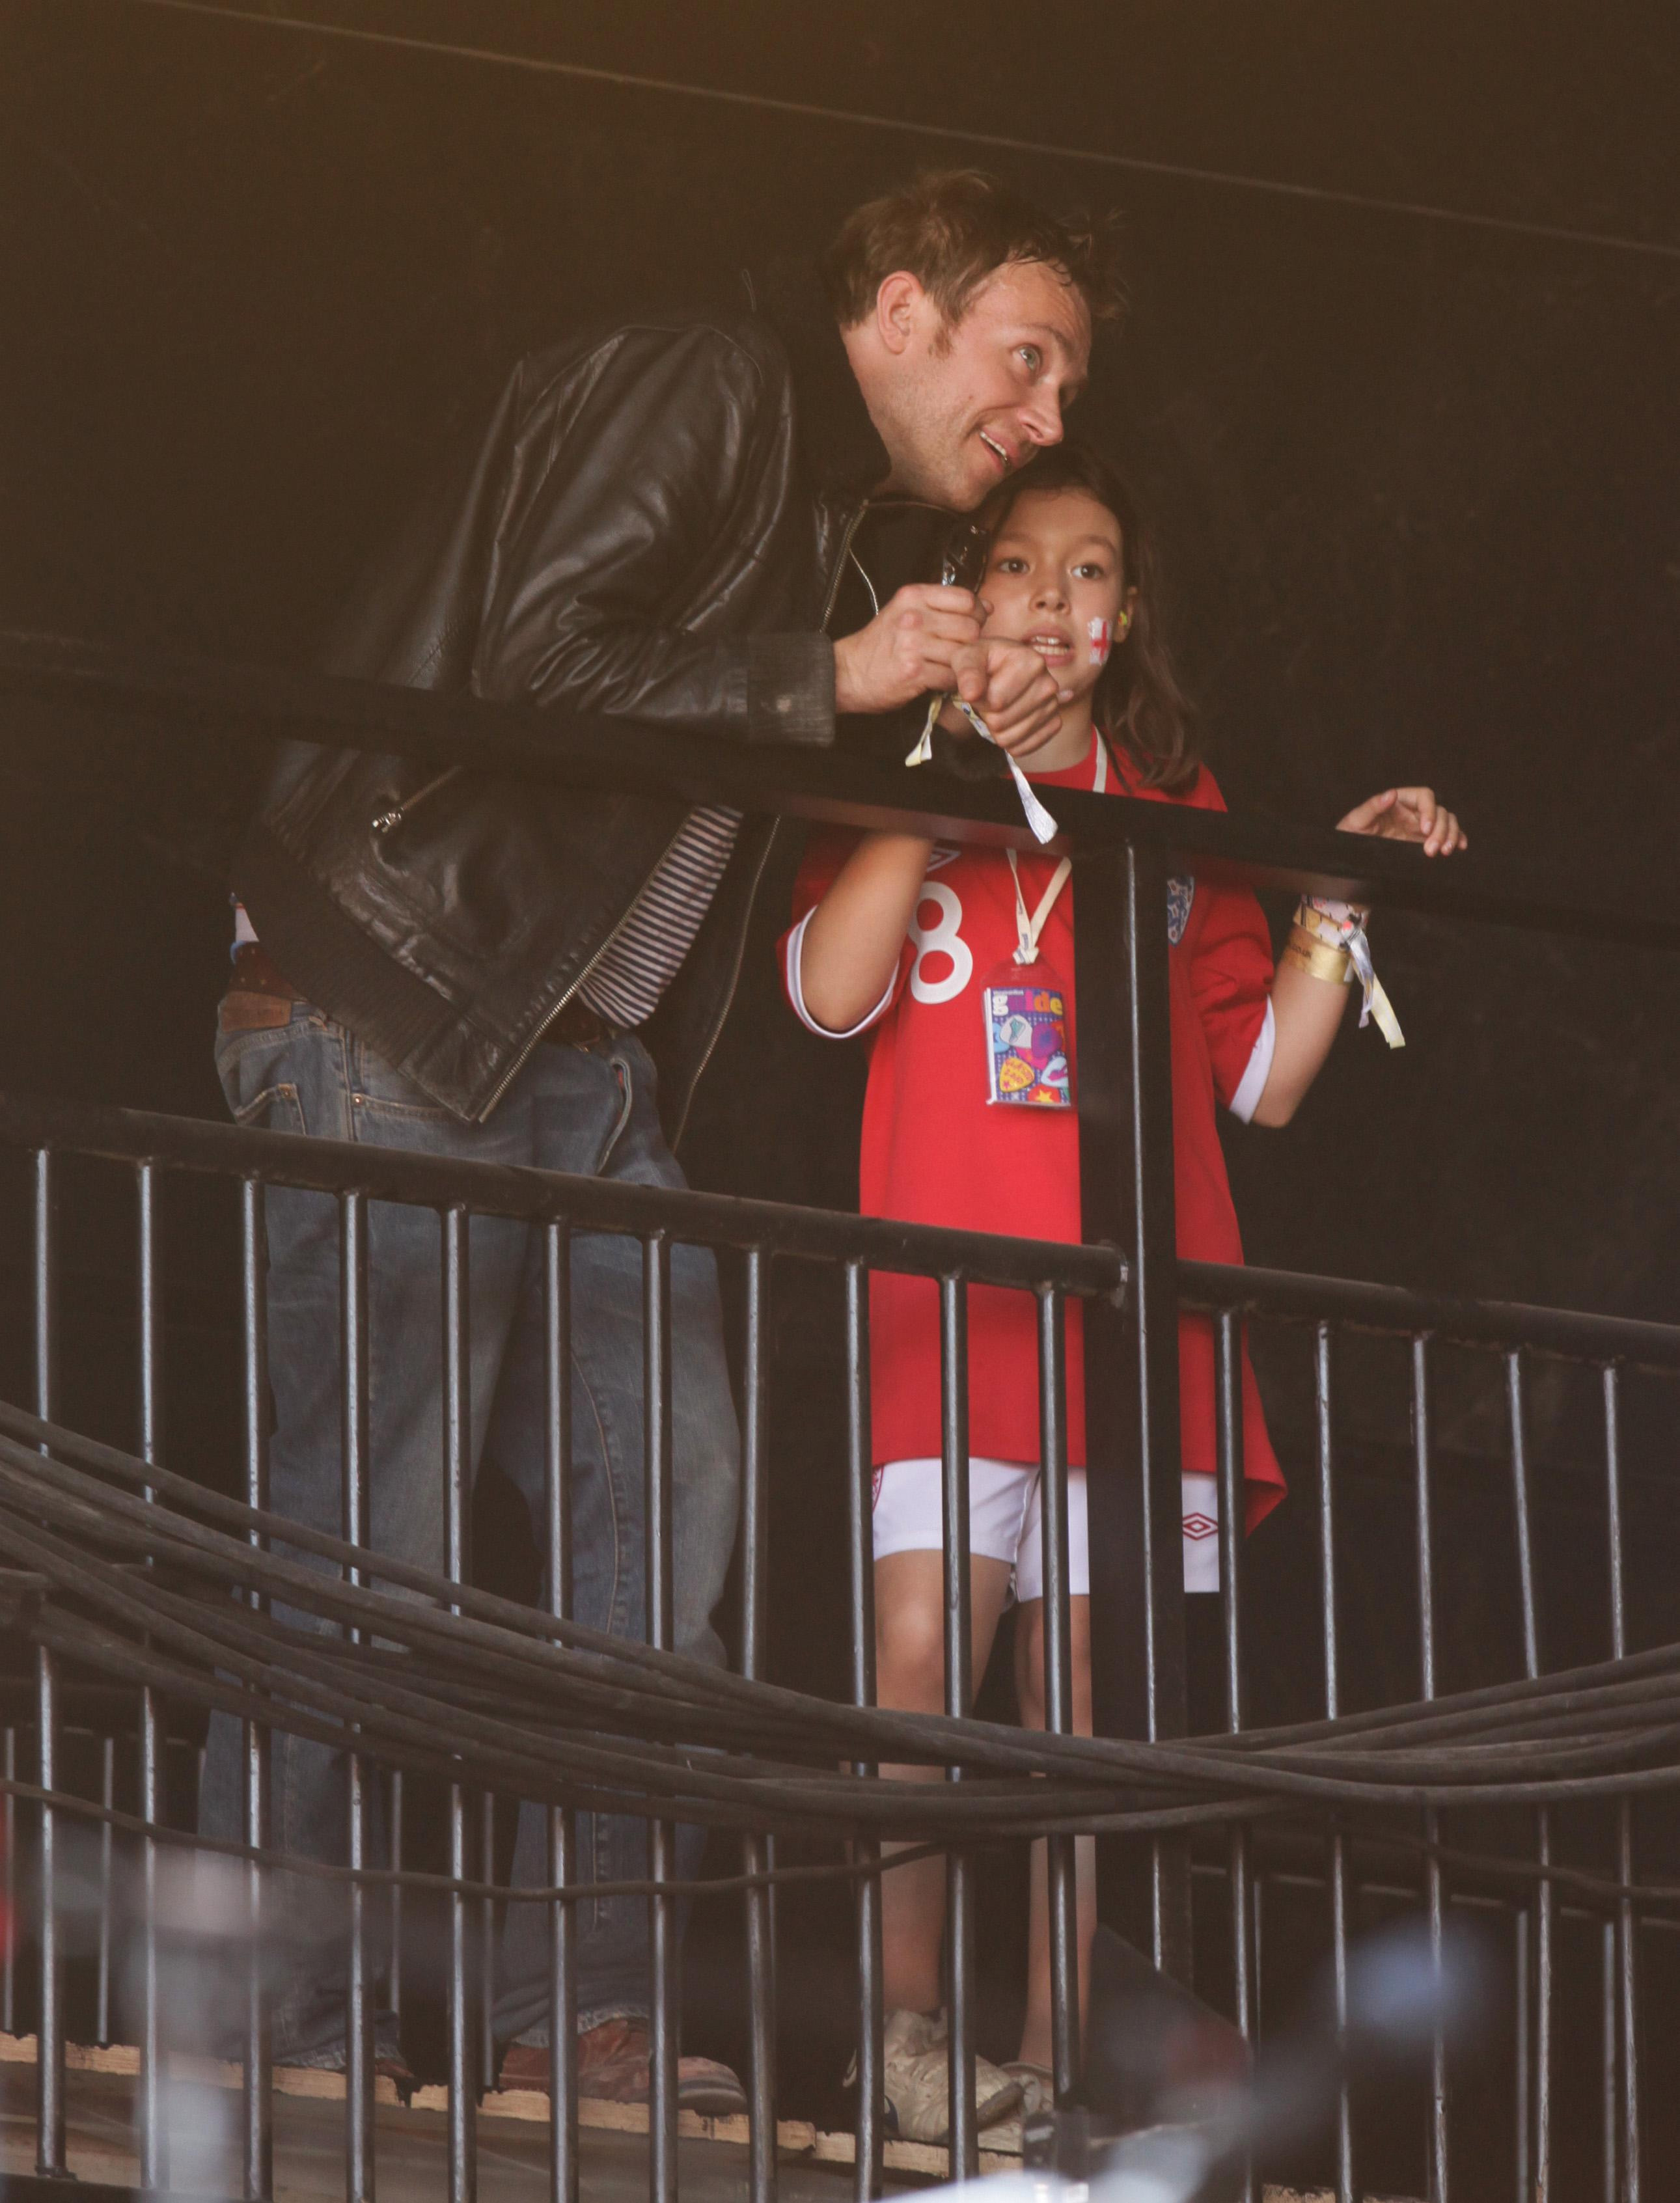 Damon Albarn and his daughter Missy Albarn during the Glastonbury Festival in Somerset on June 25, 2010 | Source: Getty Images